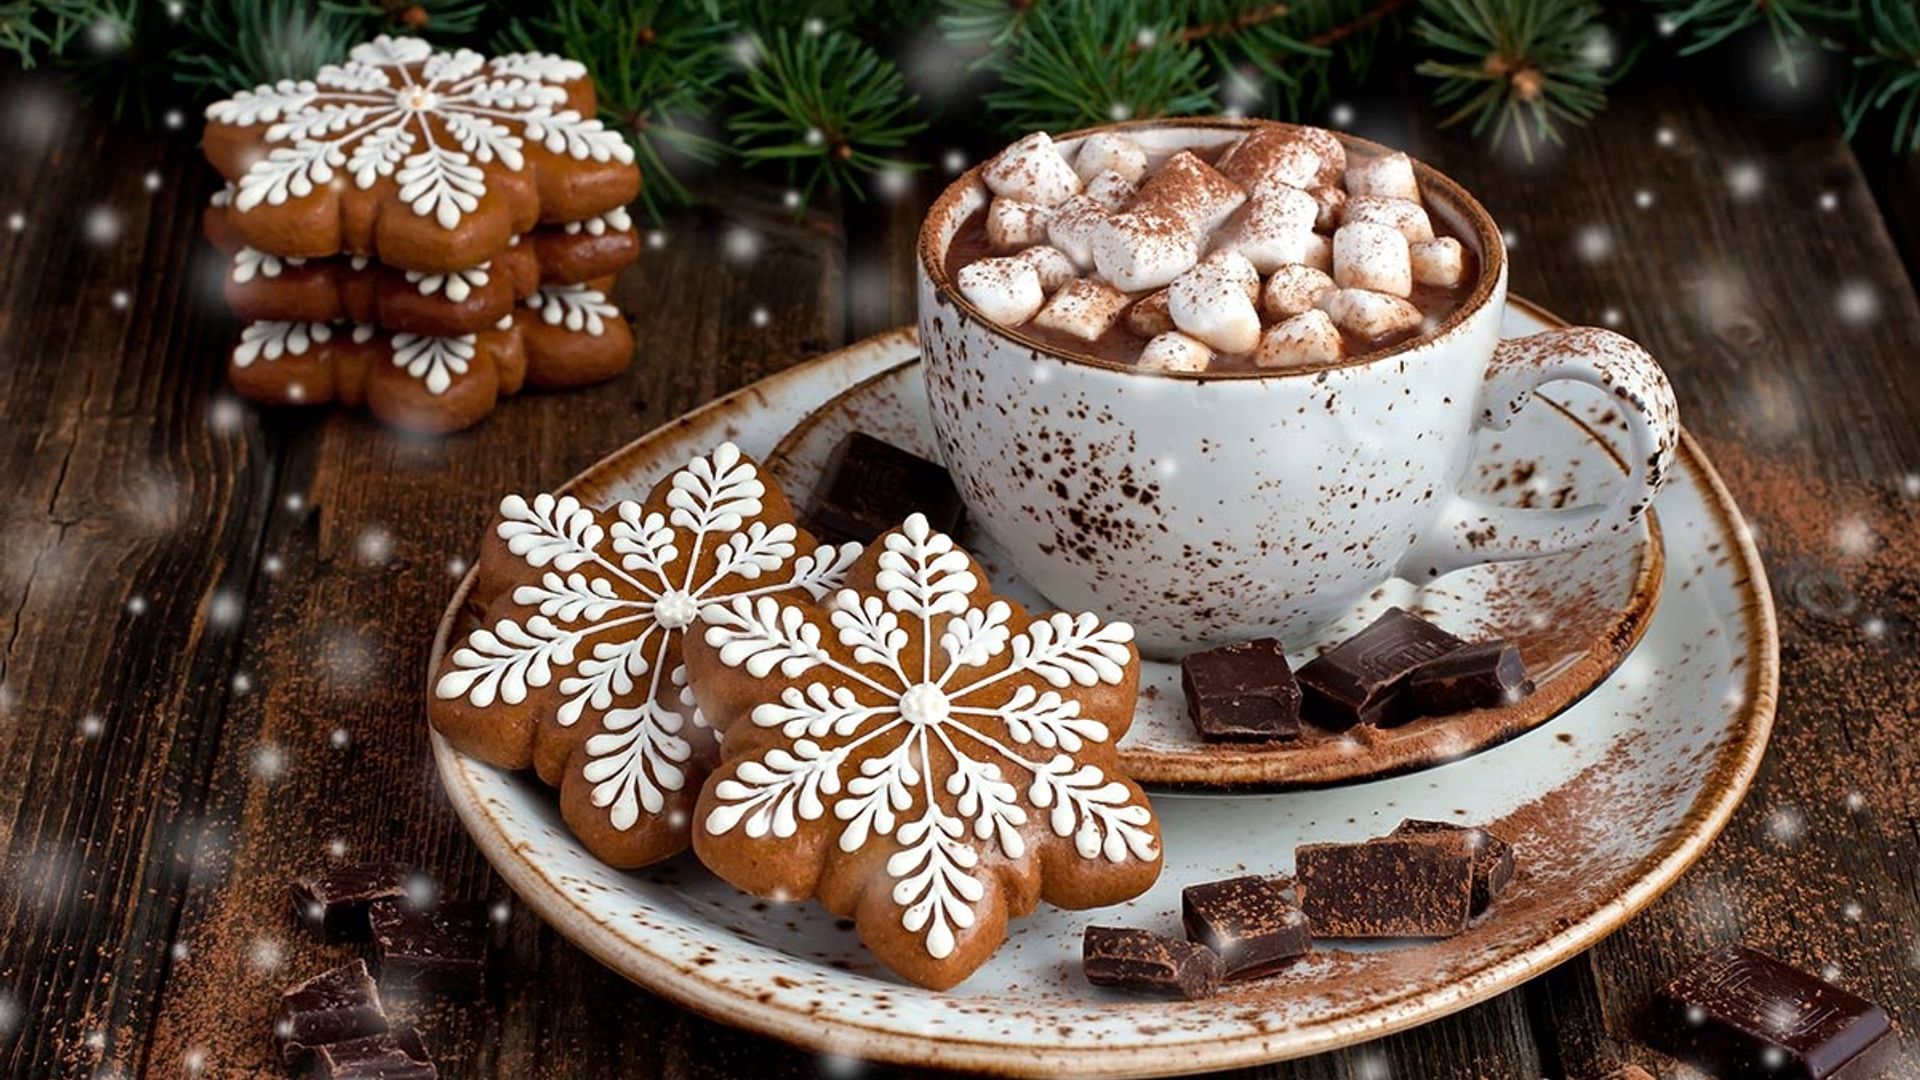 Coffee shop Christmas drinks: the sugar and fat content of festive coffees and hot chocolates